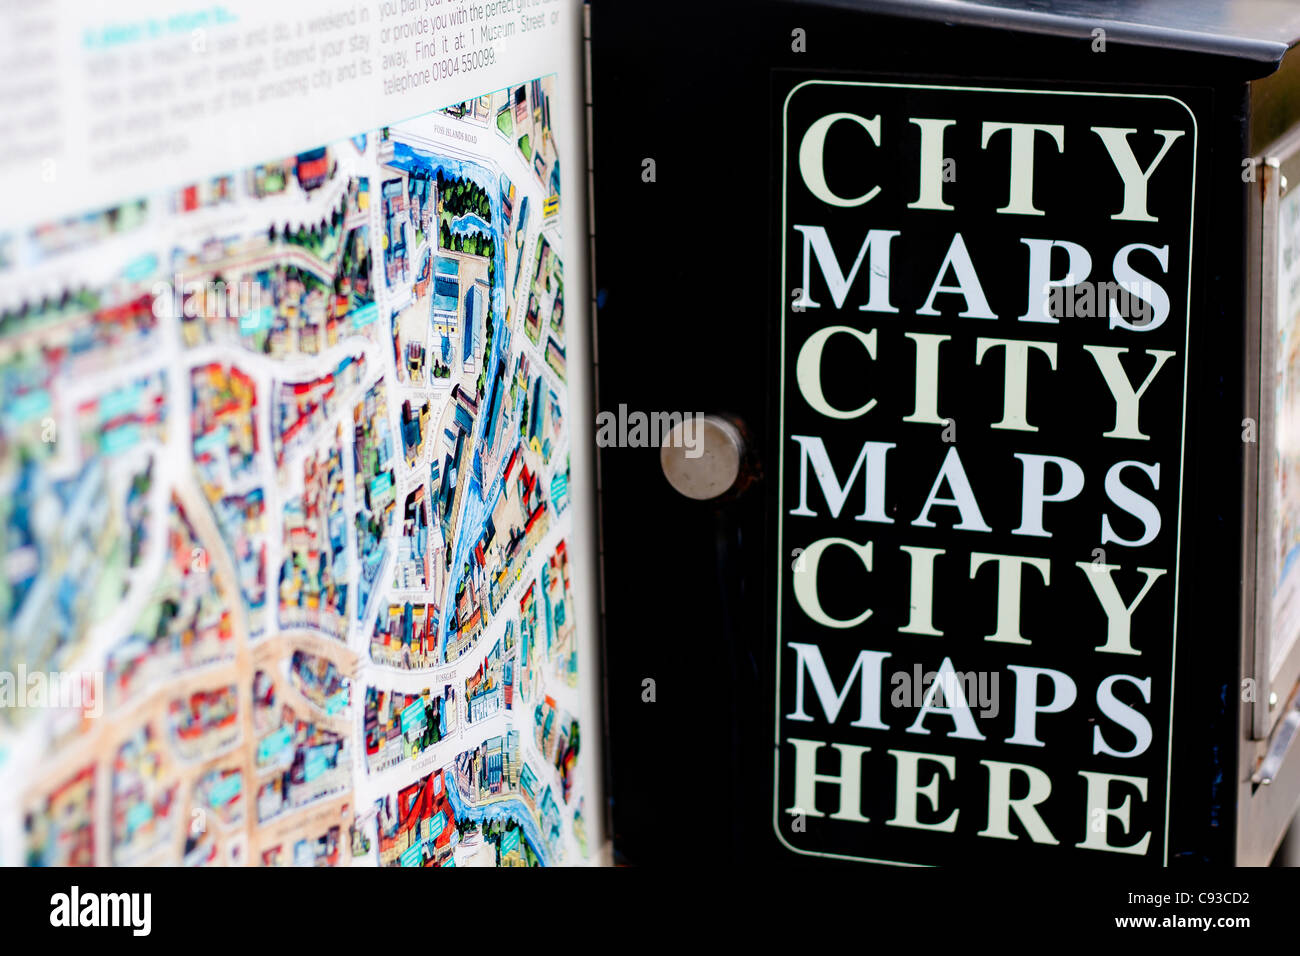 City maps for the tourism industry for visitors who are sightseeing. Stock Photo